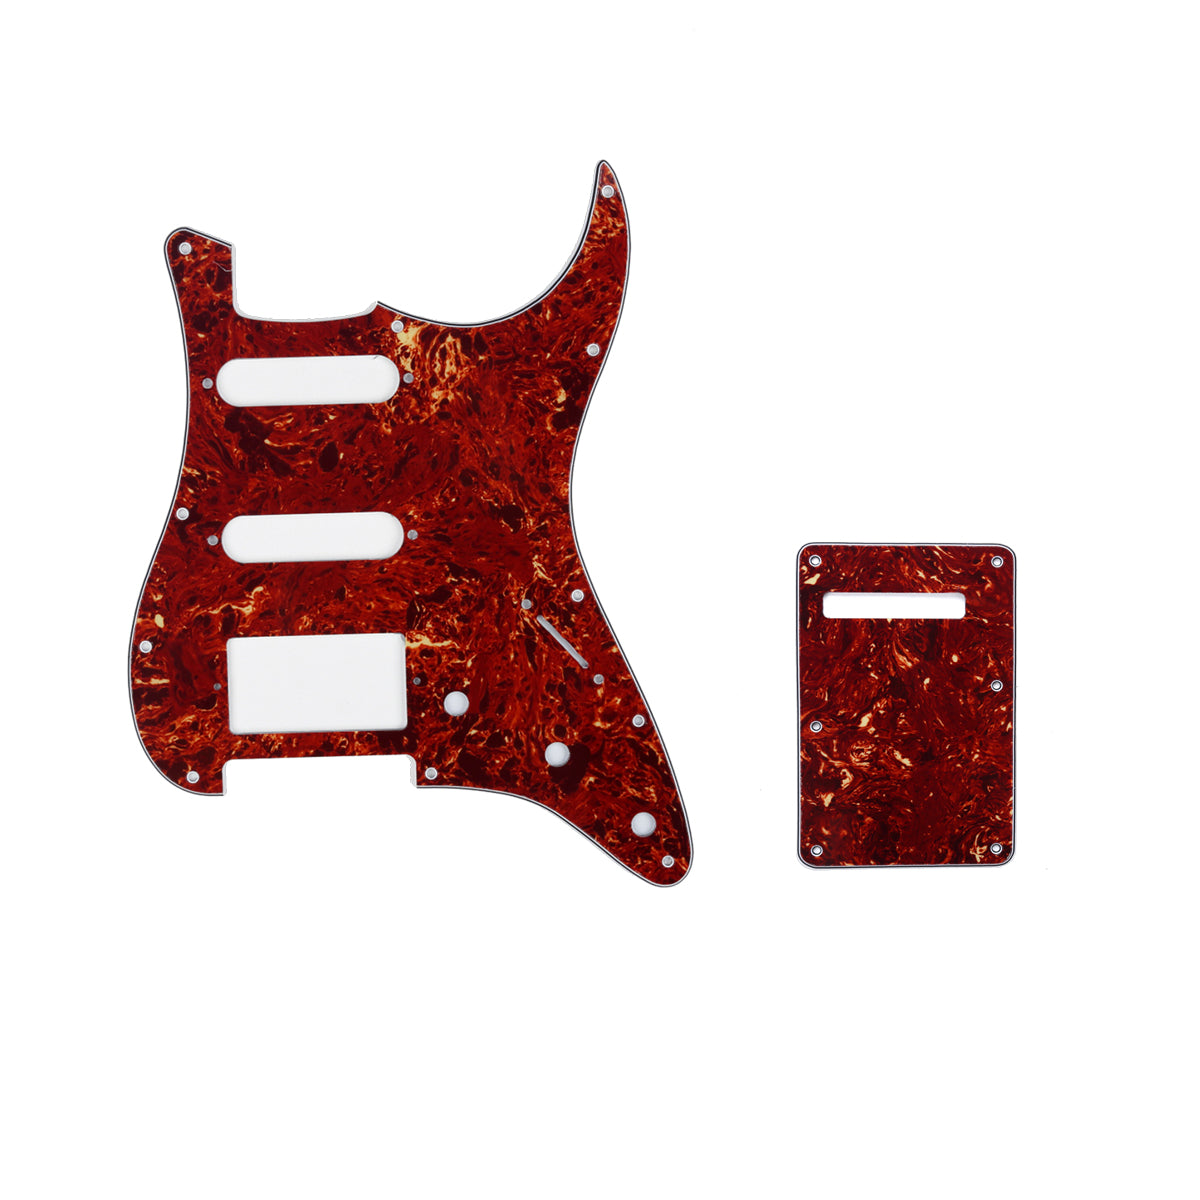 Musiclily SSH 11 Hole Strat Guitar Pickguard and BackPlate Set for Fender USA/Mexican Standard Stratocaster Modern Style, 4Ply Vintage Shell